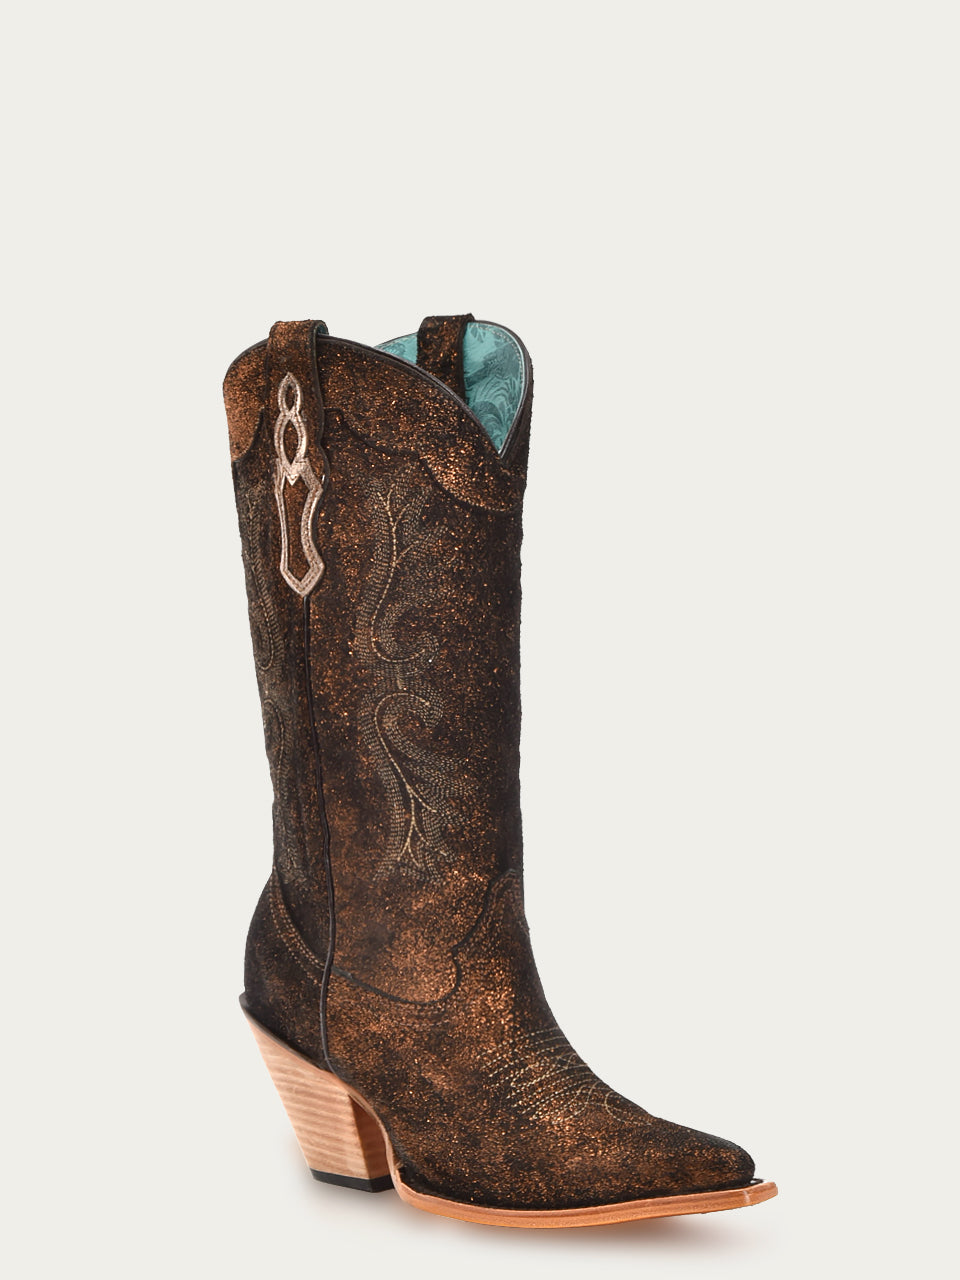 Z5240 - WOMEN'S EMBROIDERY BLACKED COPPER  POINTED TOE COWBOY BOOT